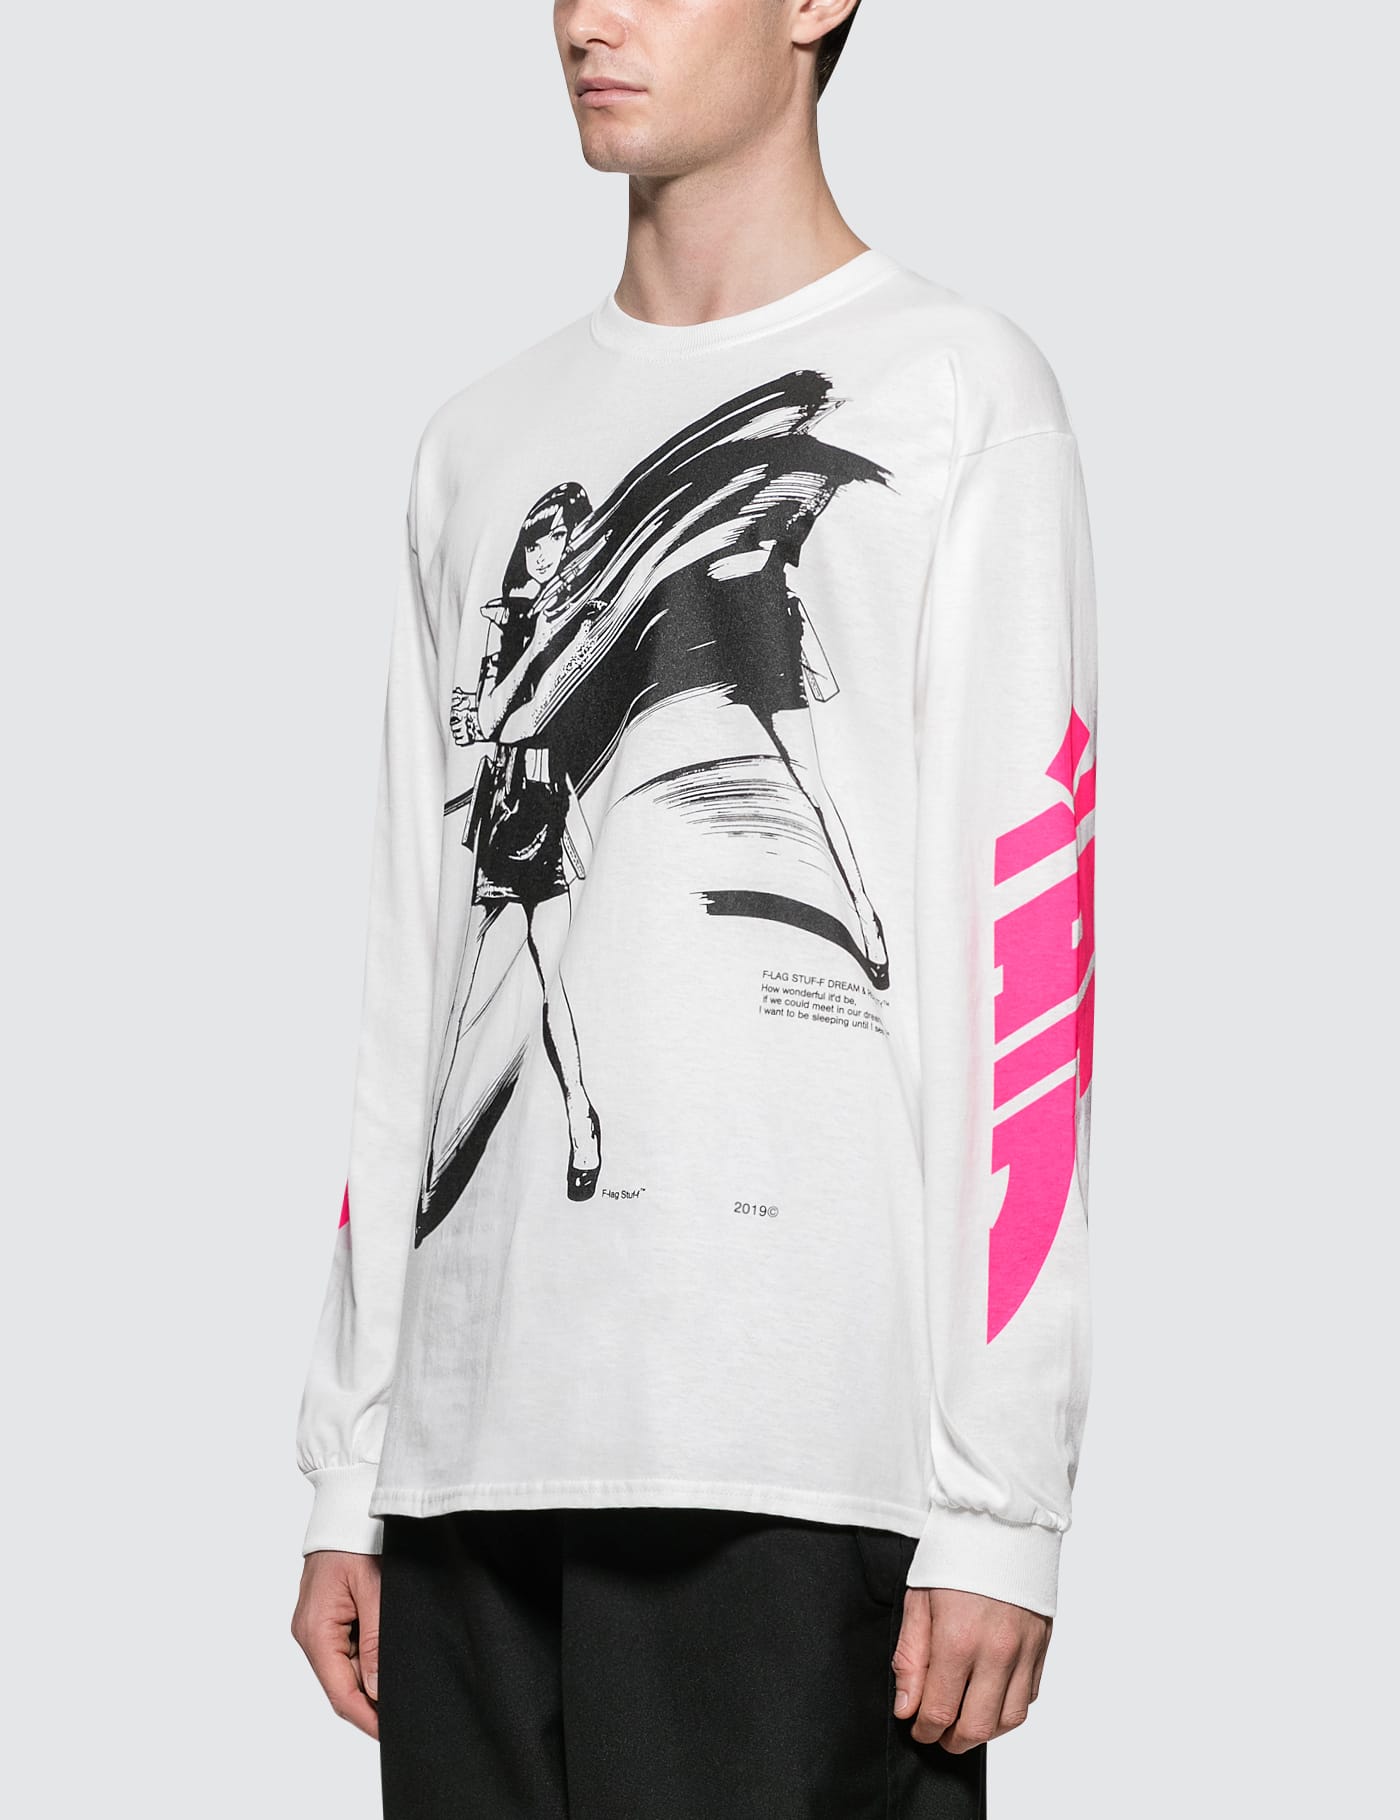 Flagstuff - Dream And Reality L/S T-Shirt A | HBX - Globally 